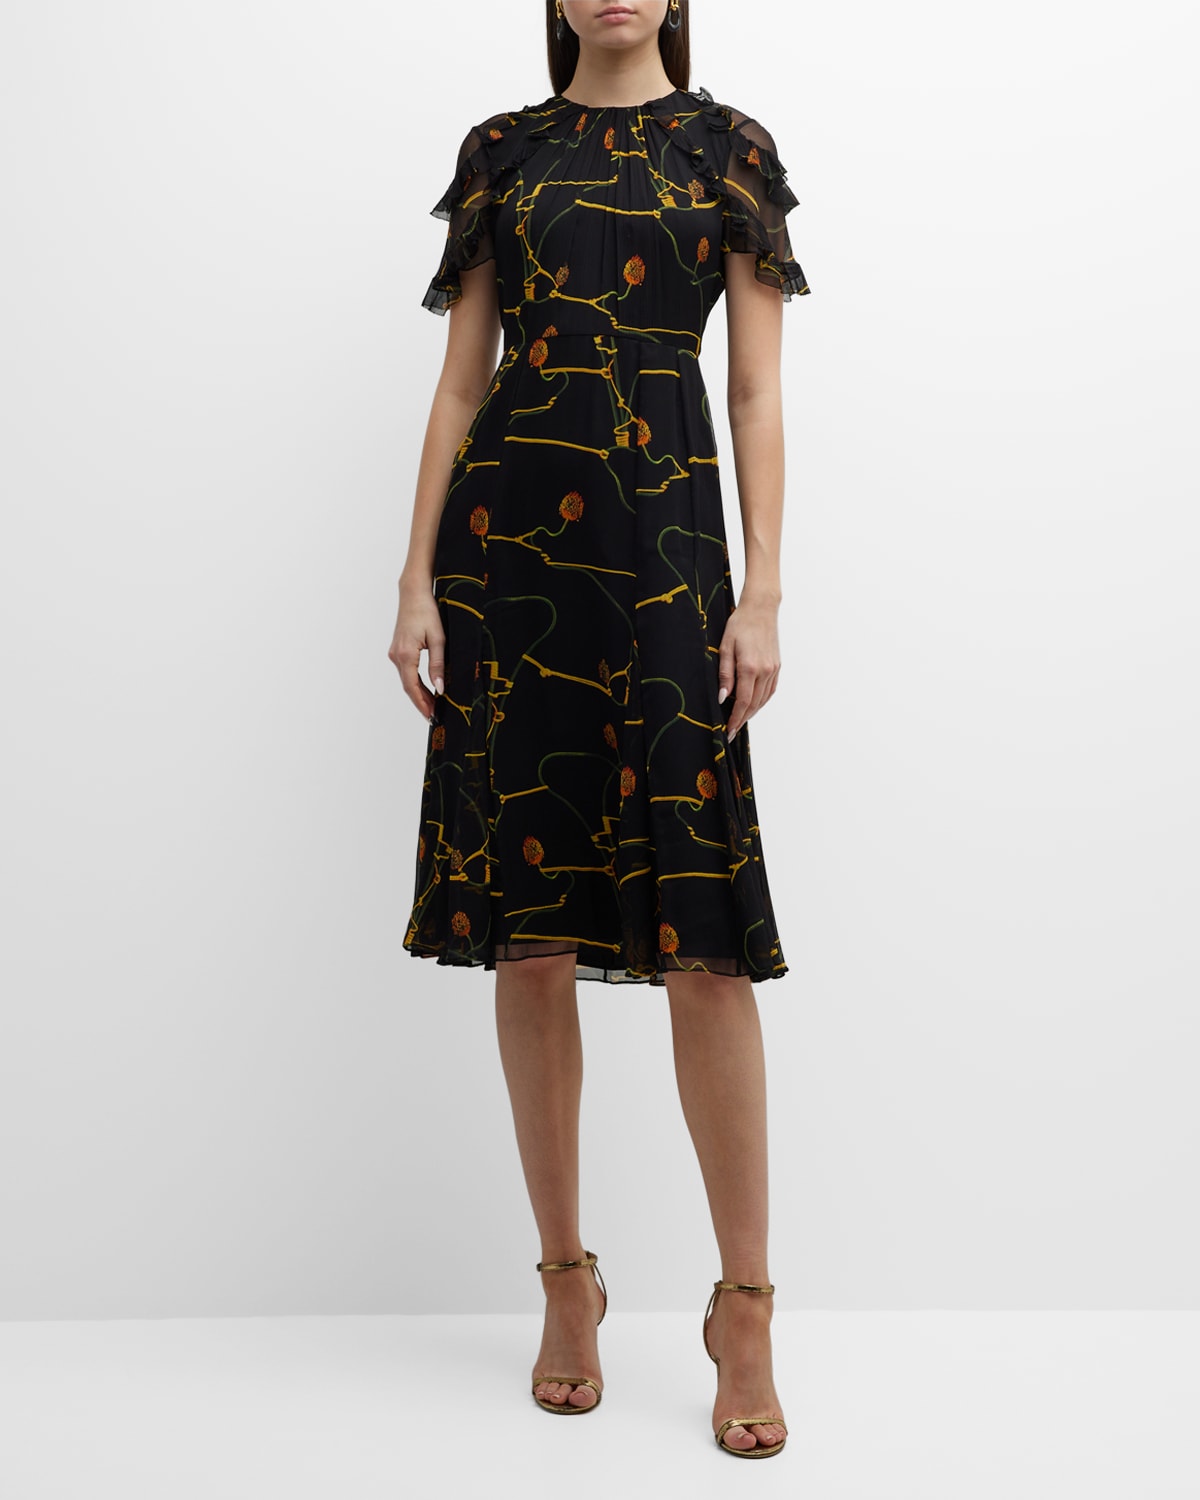 Jason Wu Collection Silk Crinkle Printed Day Dress with Ruffle Sleeves